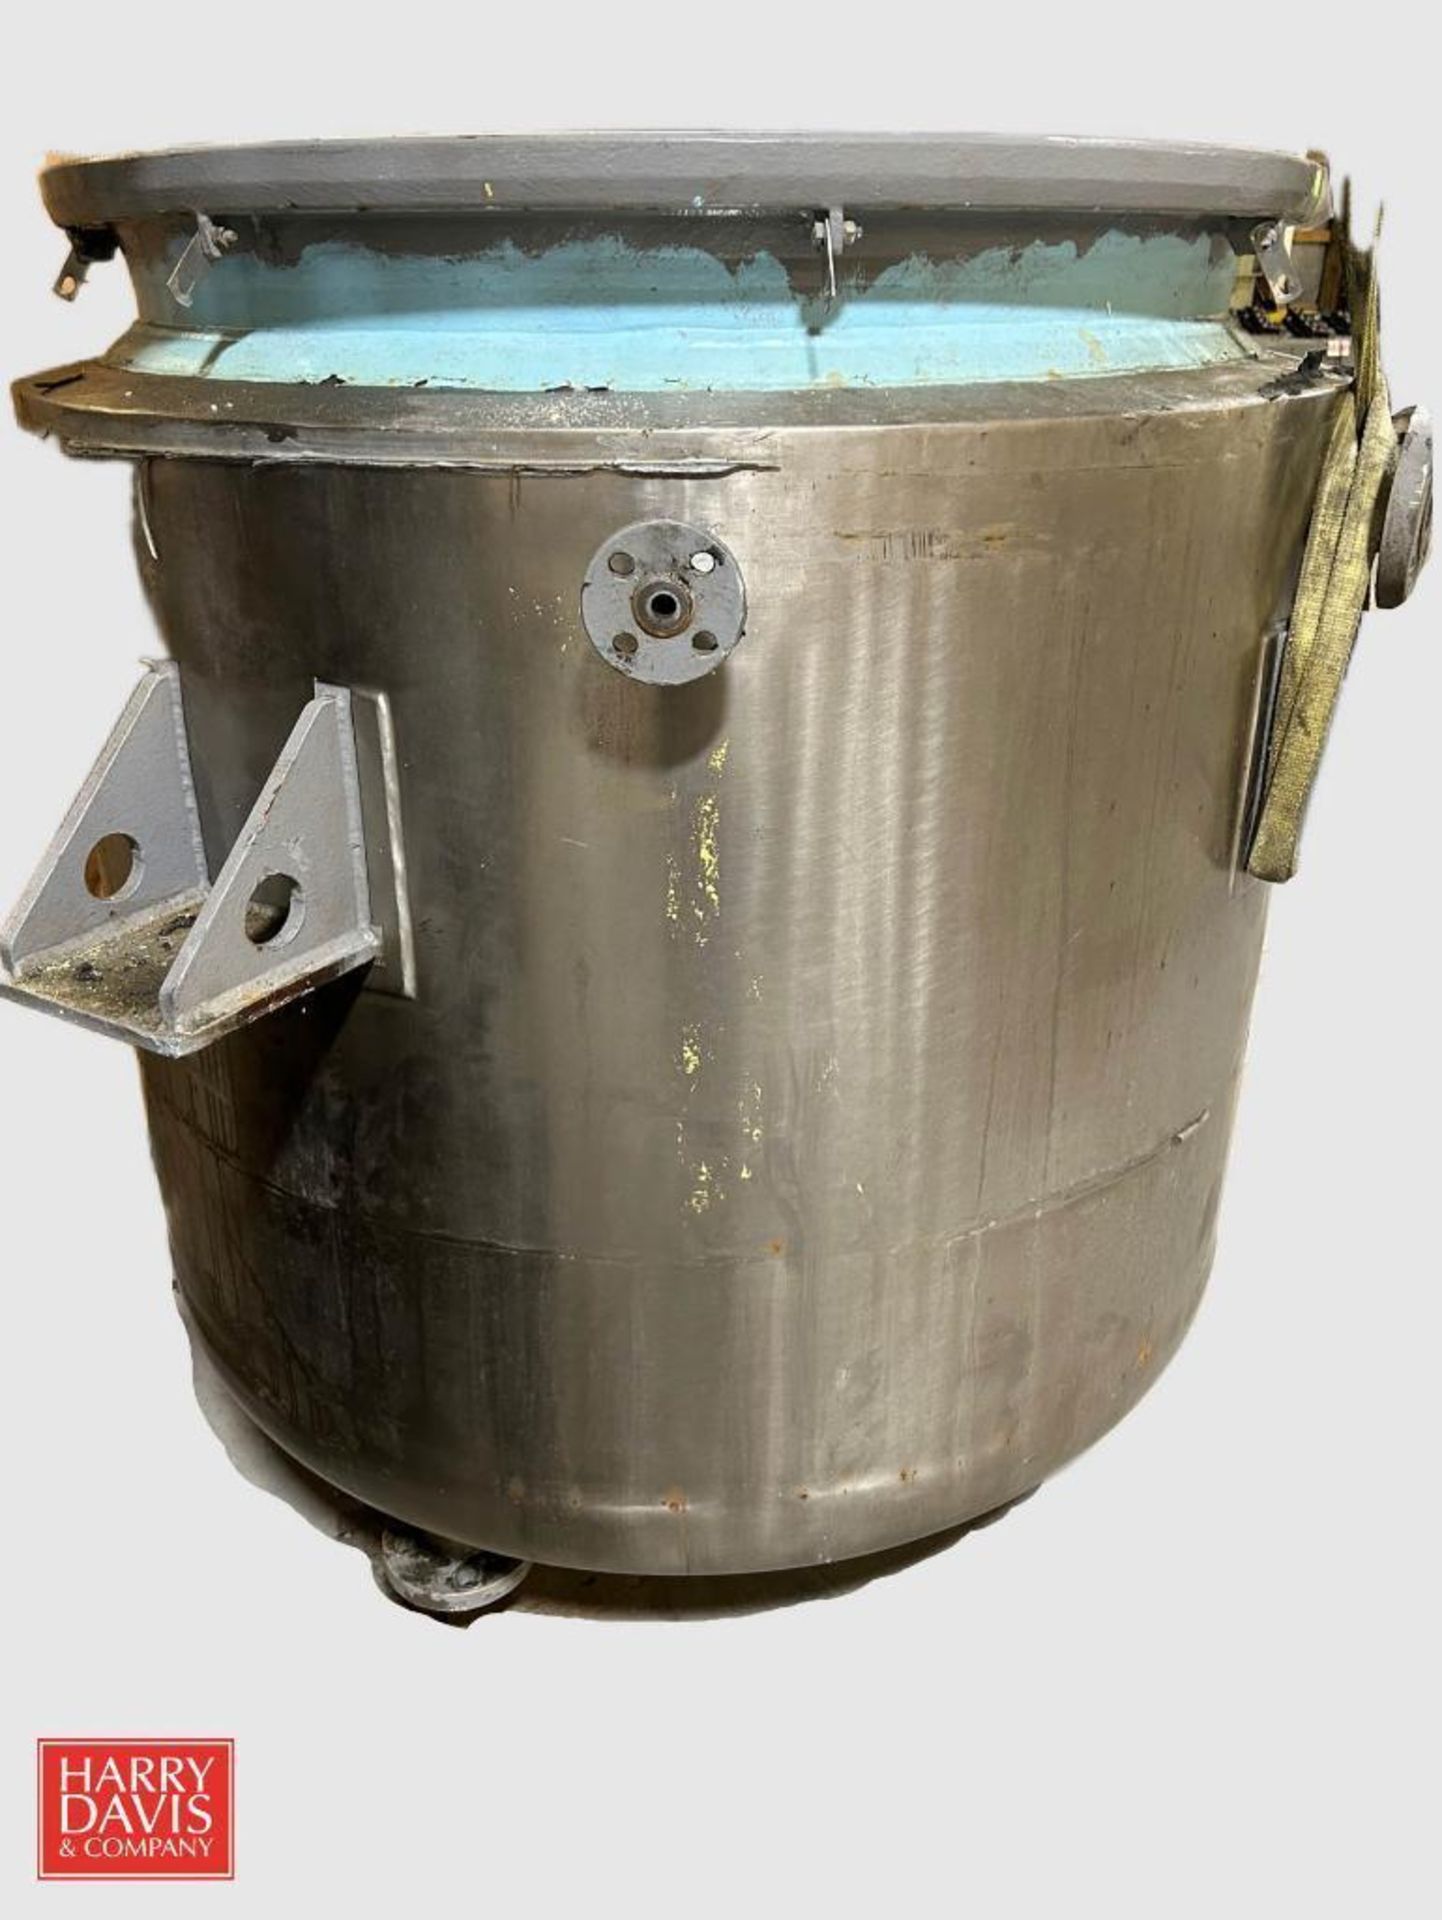 De Dietrich 200 Gallon Glass Lined Jacketed Reactor Tank - Image 2 of 5